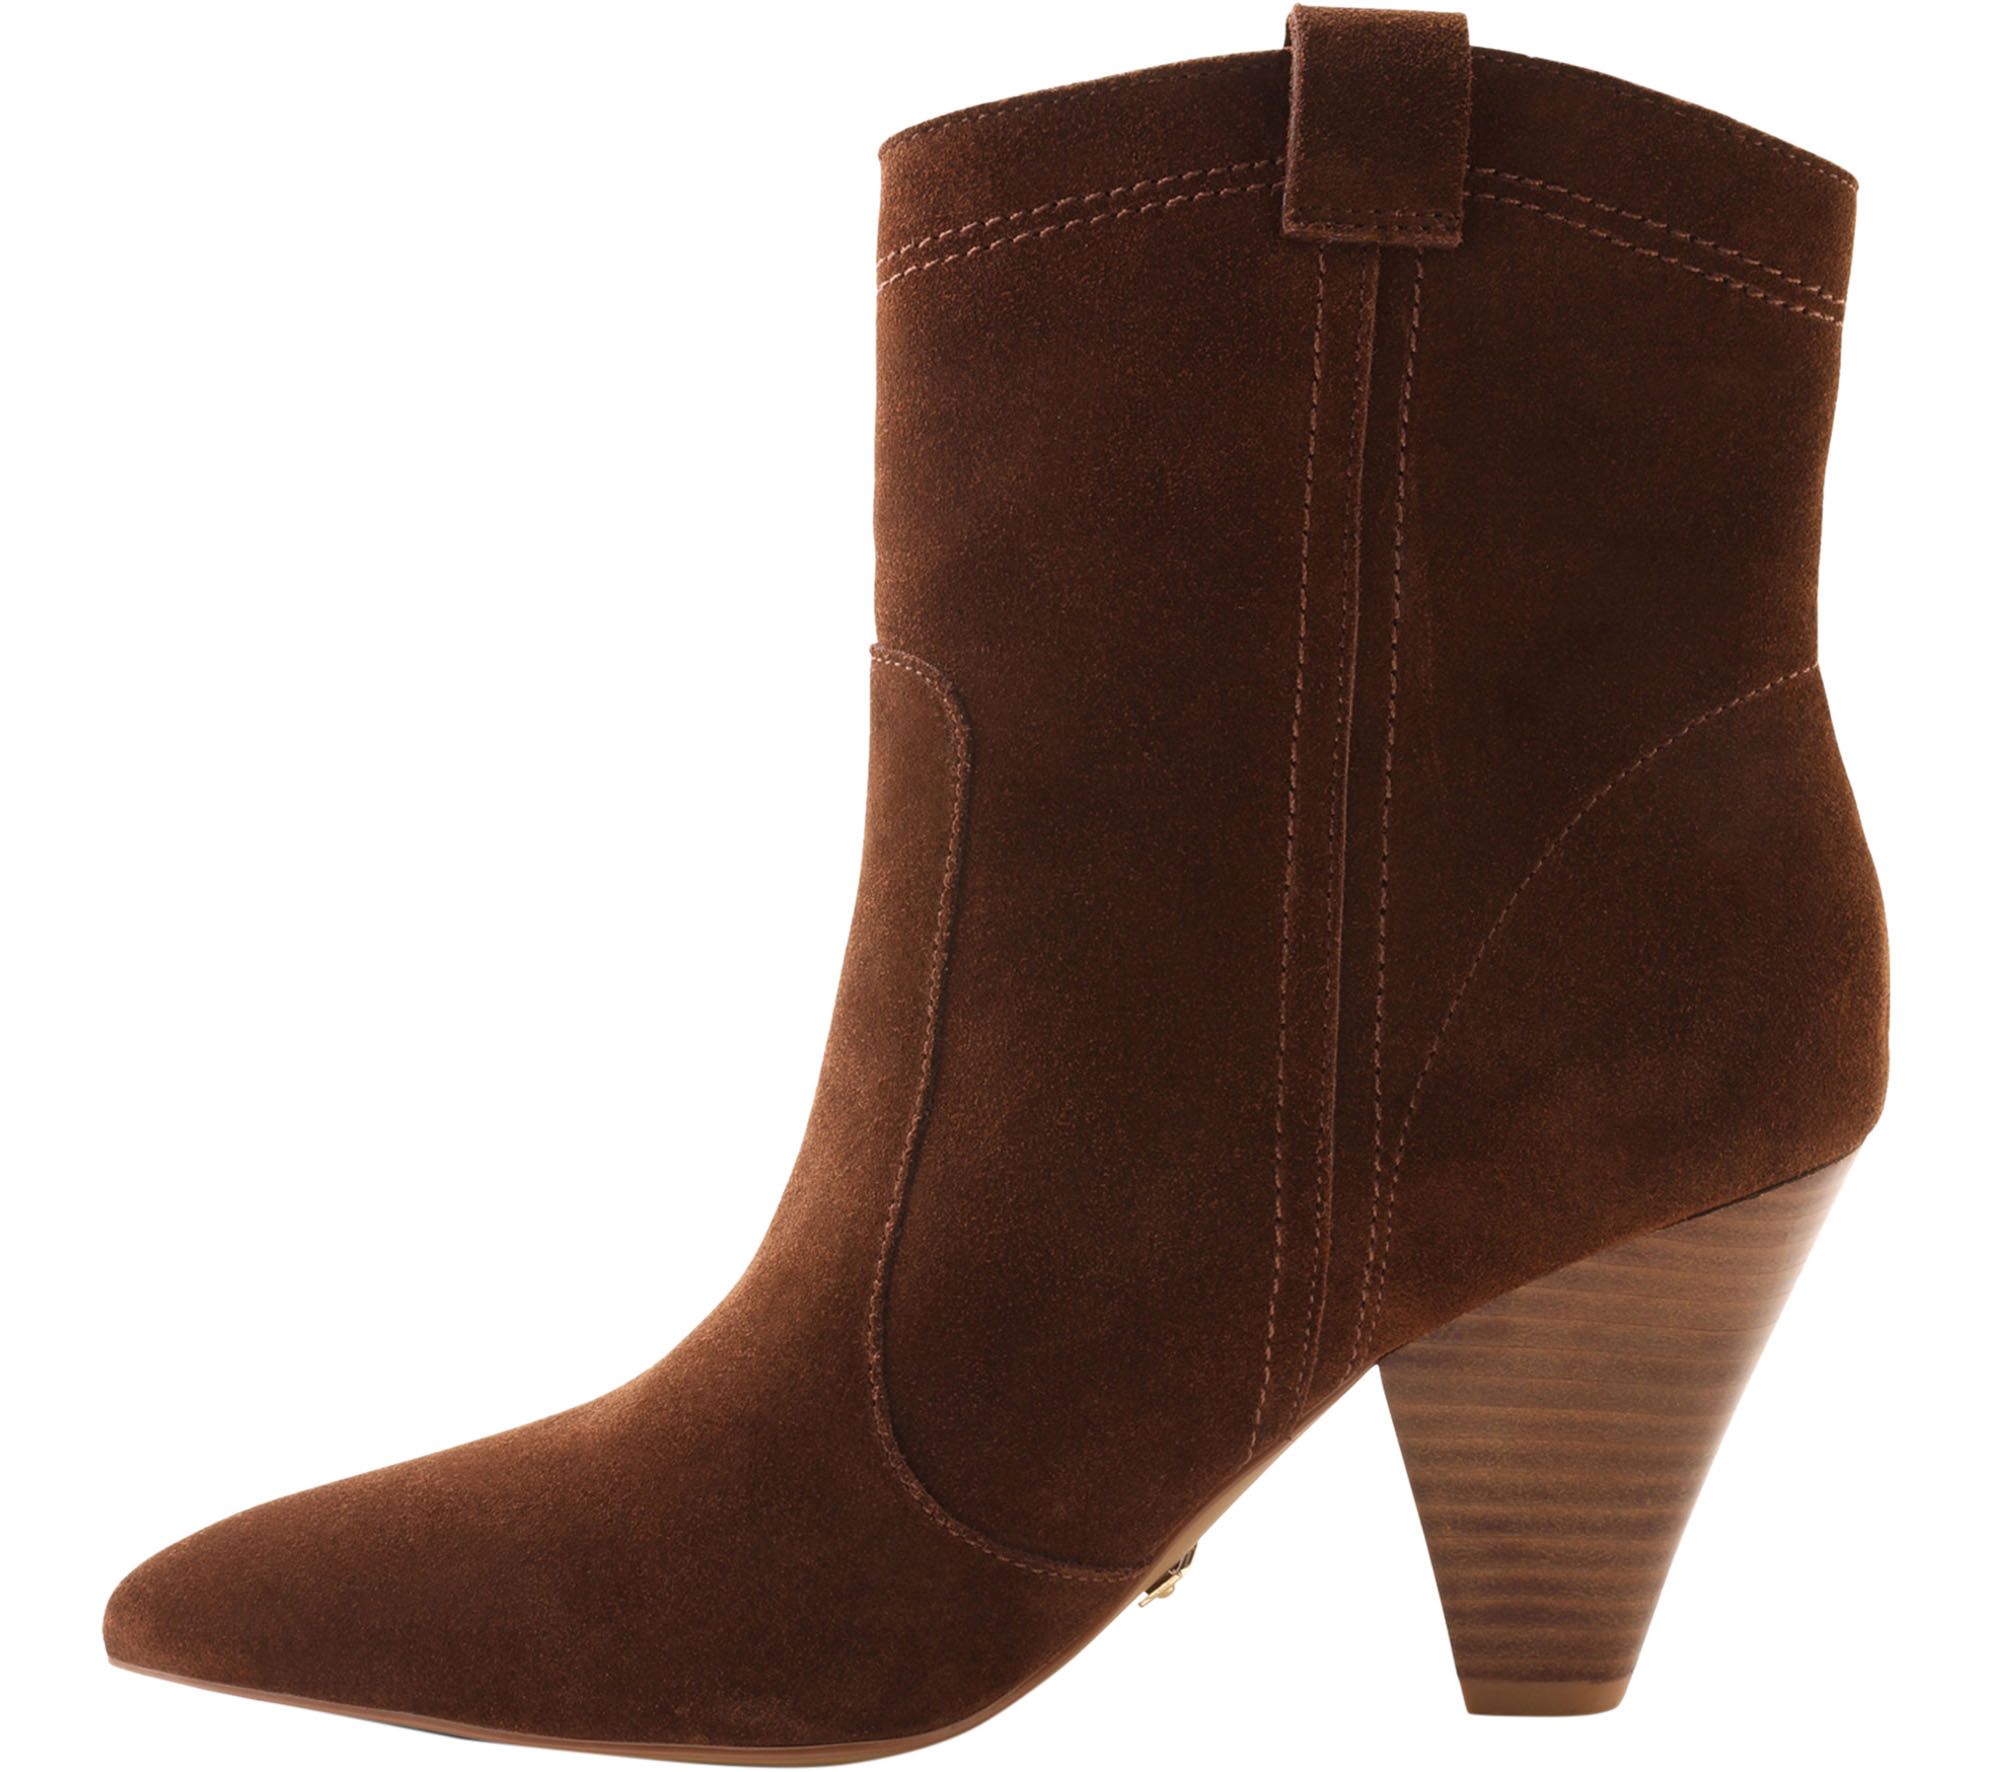 Kensie Leather Booties - Kalila - QVC.com